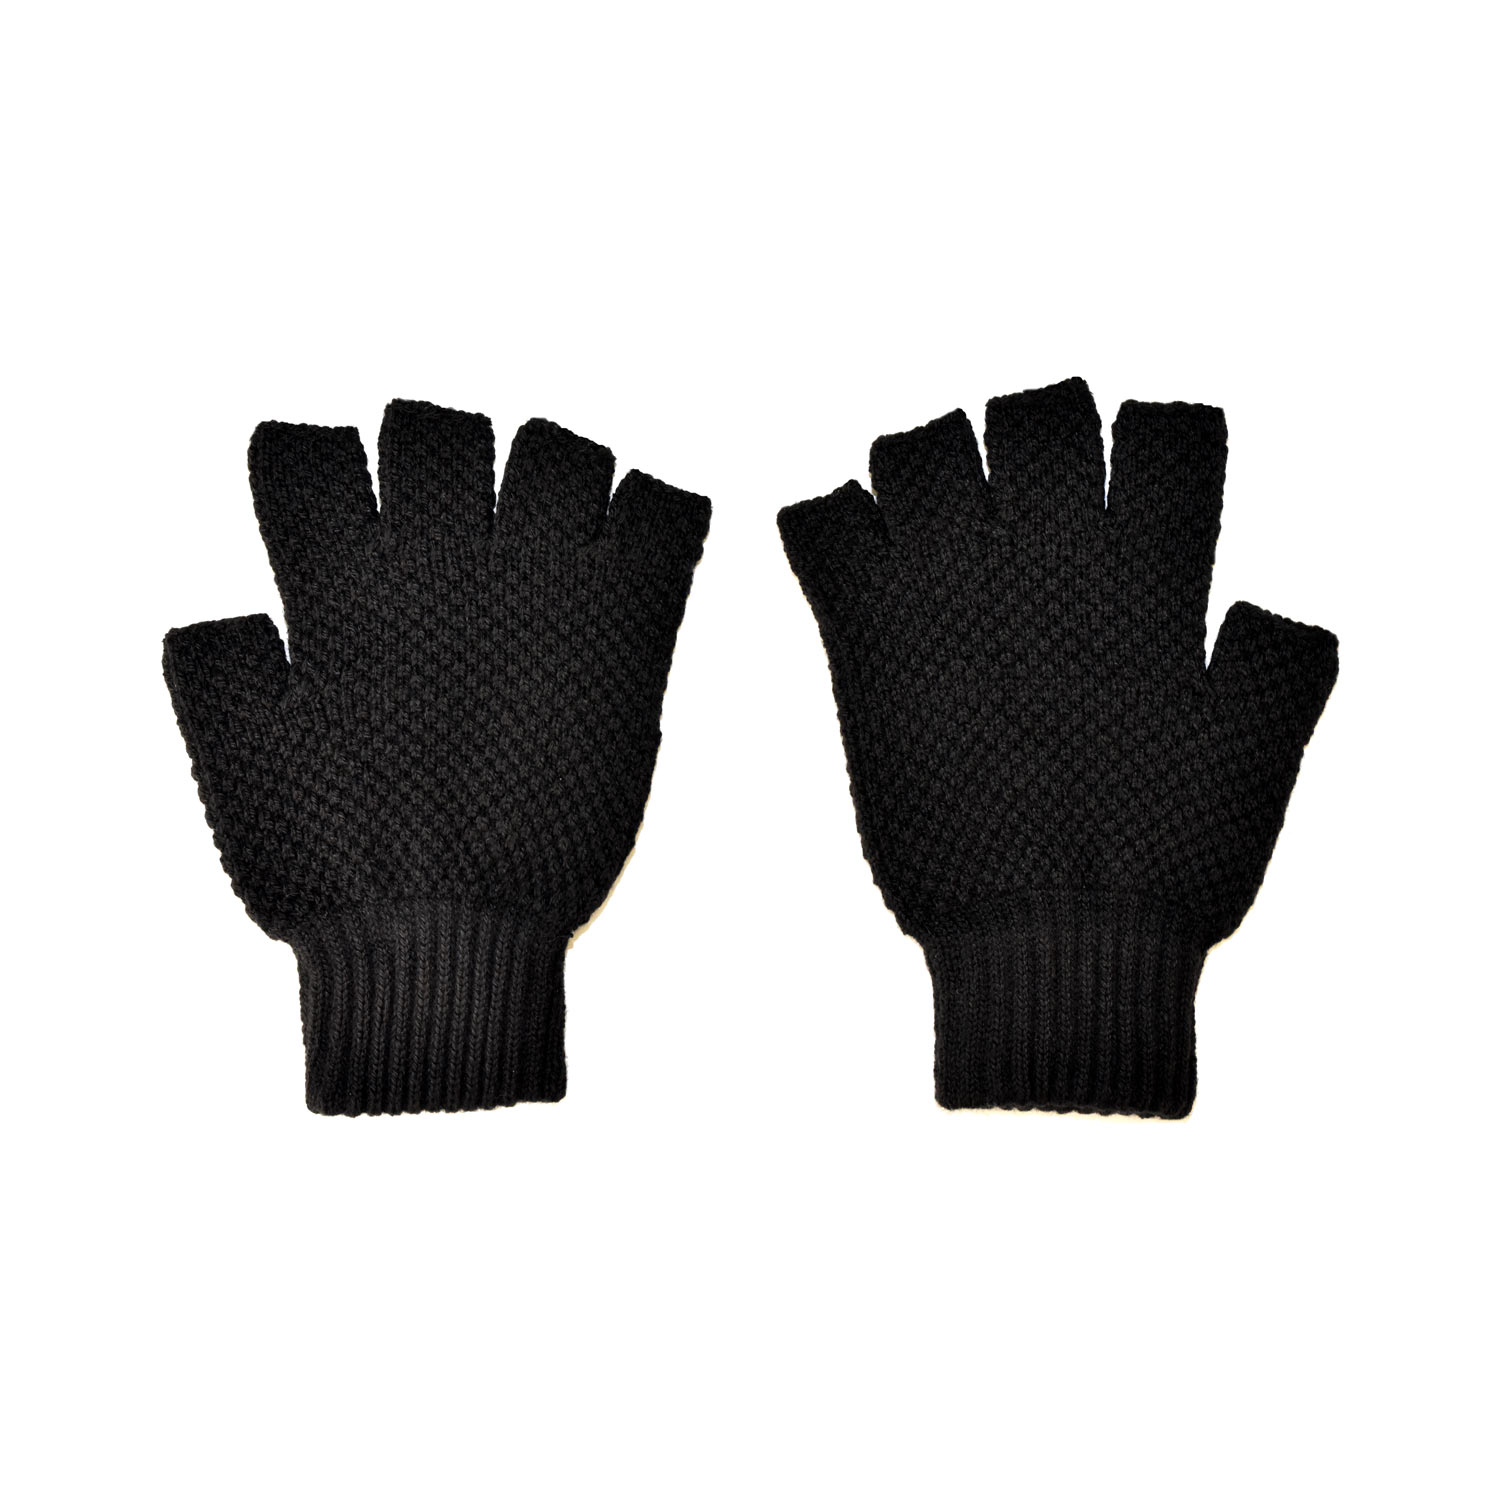 Rollers - Black Fingerless Gloves - Men's by Straight to Hell